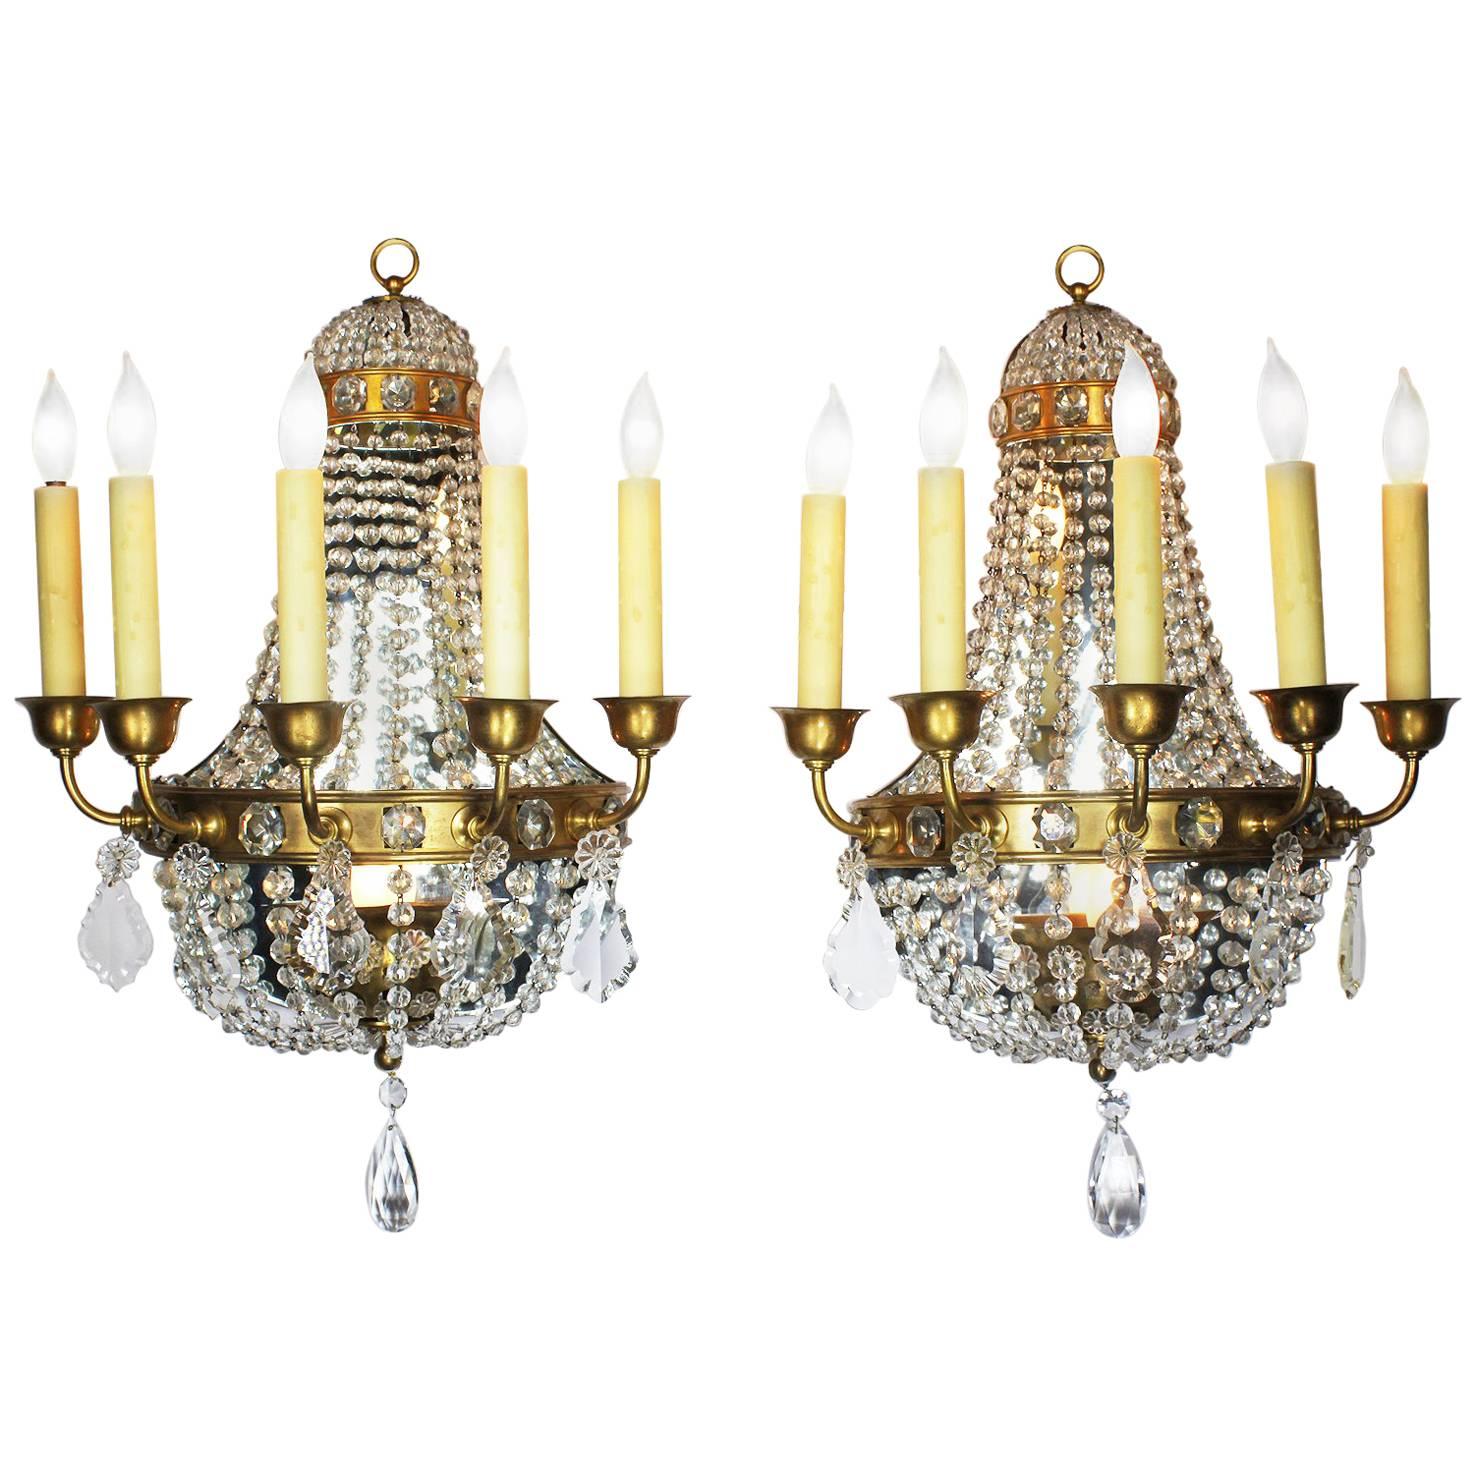 Pair of French Neoclassical Revival Louis XVI Style Cut-Glass Wall Sconces